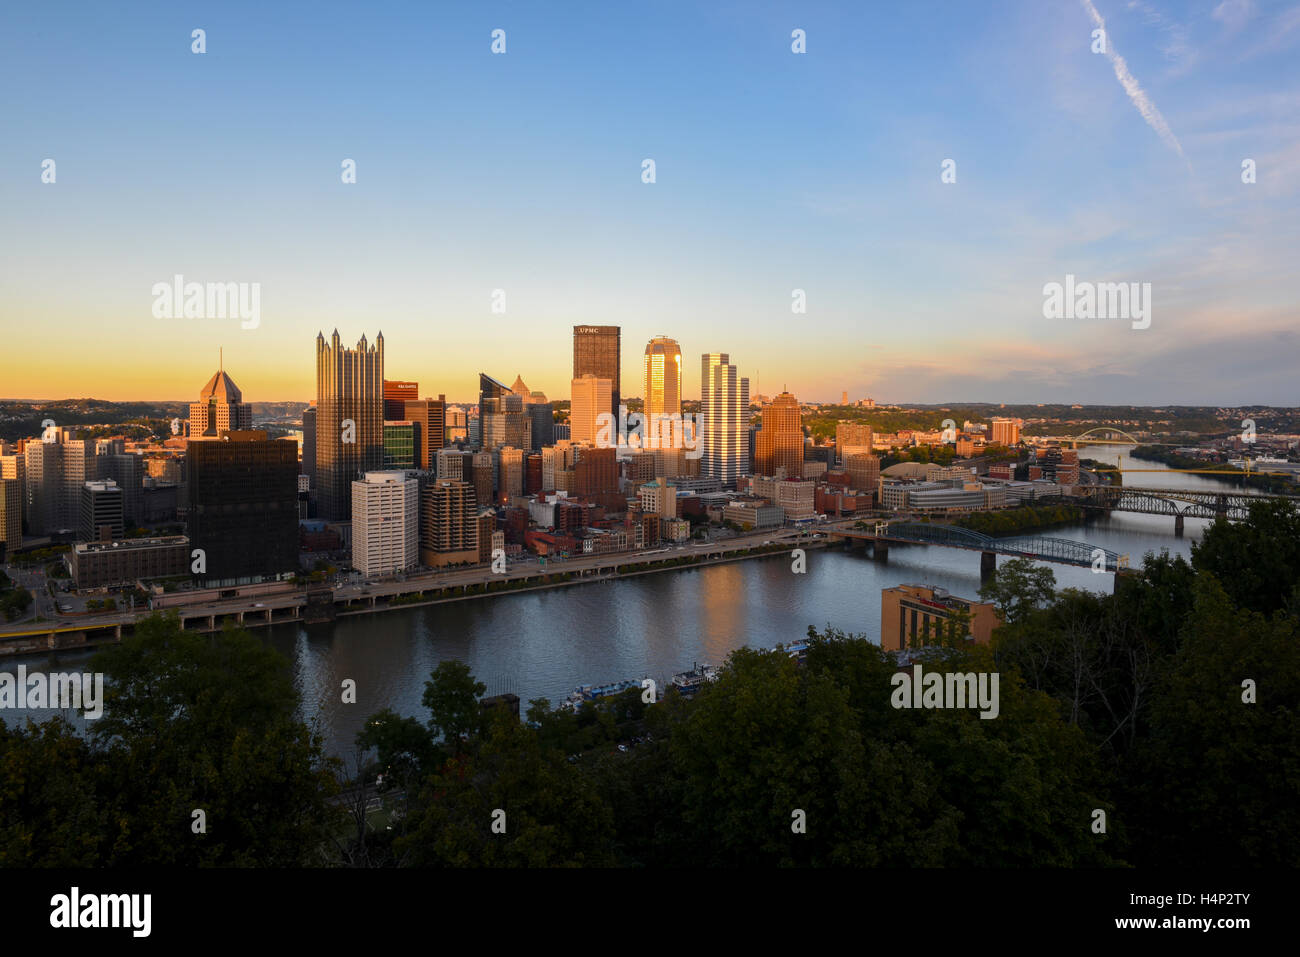 USA Pittsburgh PA New York Skyline at Dusk nuit sky scrapers highrise building Banque D'Images